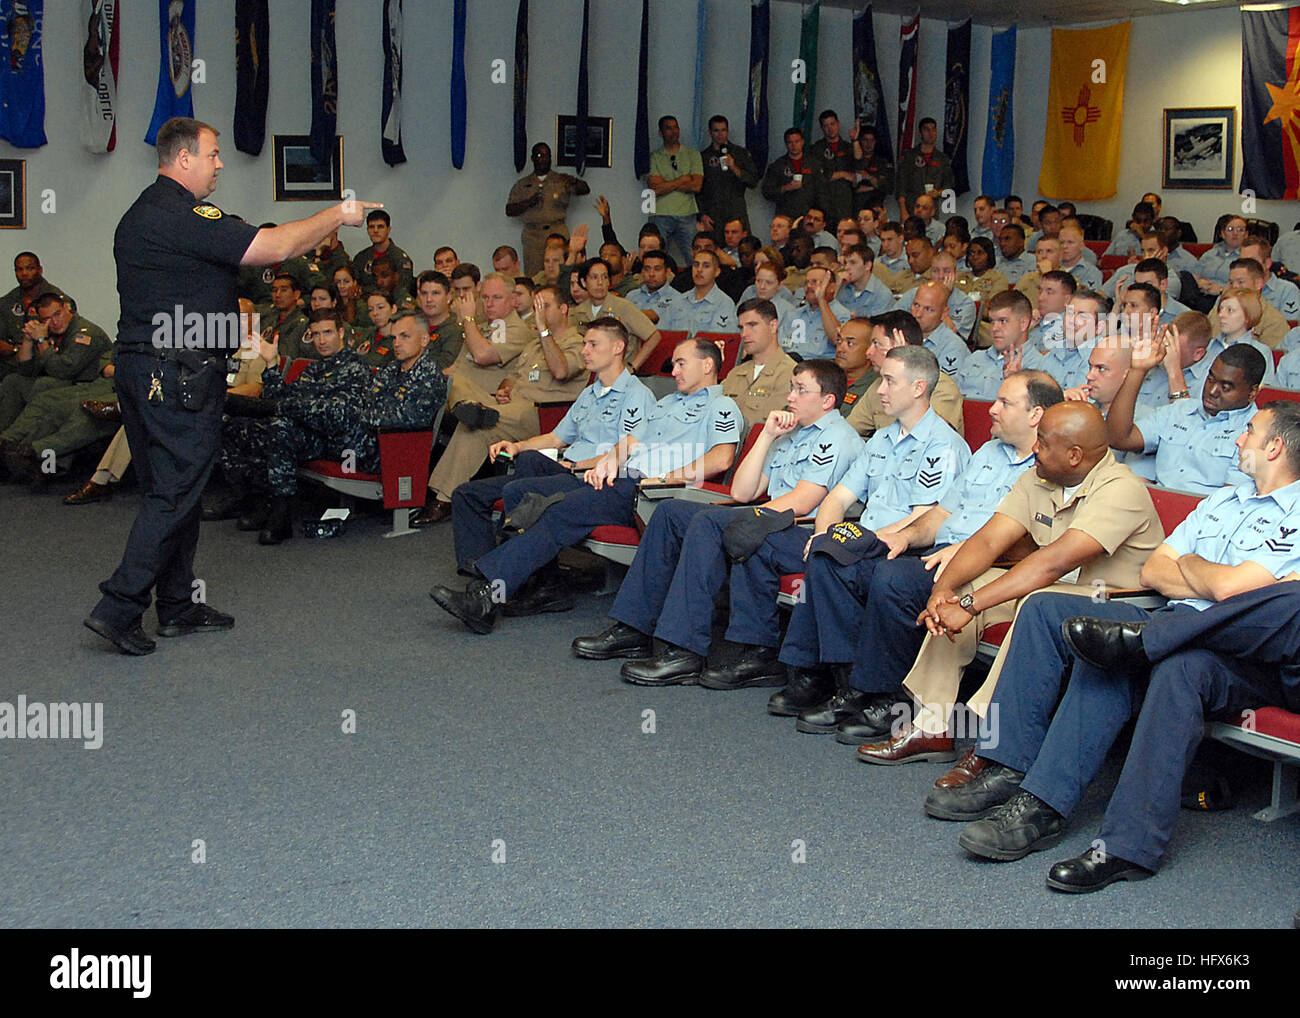 090317-N-3013W-015 JACKSONVILLE, Fla. (March 17, 2009) Deputy Wade Chapman of the Jacksonville Sheriffís Office takes questions from the Sailors assigned to the 'War Eagles' of Patrol Squadron (VP) 16 about Florida state traffic violations. Chapman is volunteering as a presenter during a VP-16 safety stand down. (U.S. Navy photo by Mass Communication Specialist 2nd Class Charles White/Released) US Navy 090317-N-3013W-015 Deputy Wade Chapman of the Jacksonville Sheriff&-195;&-173;s Office takes questions from the Sailors assigned to the Stock Photo